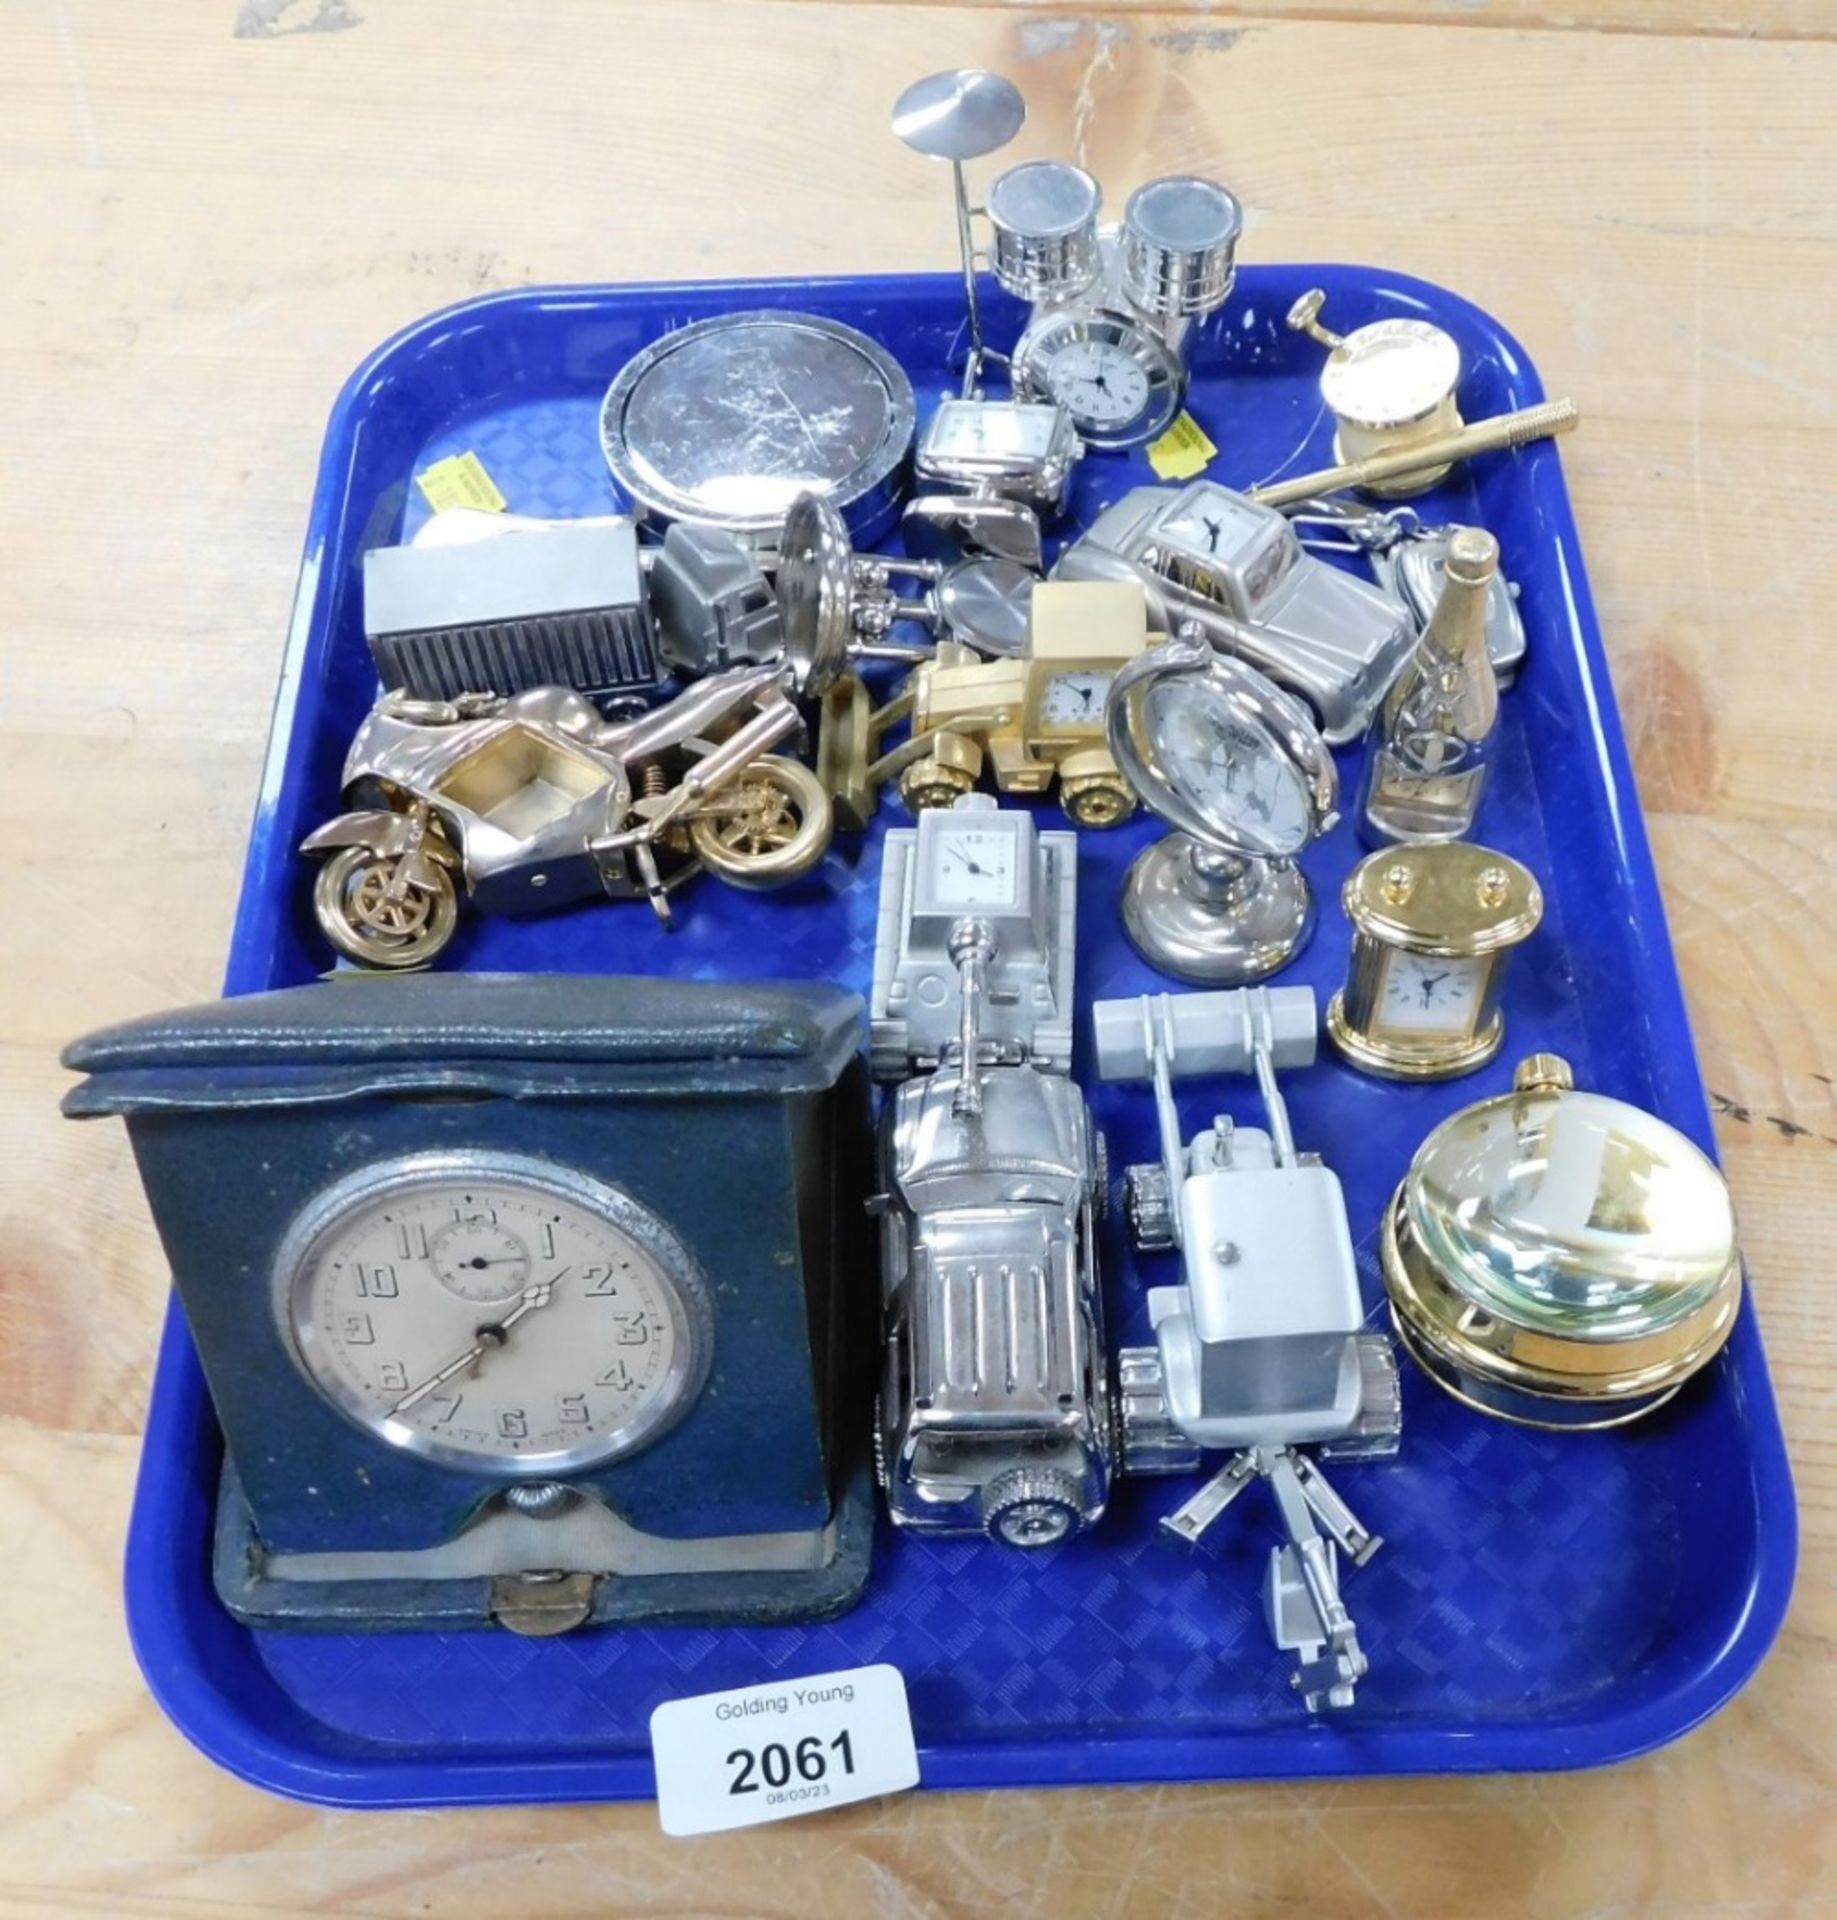 A group of novelty miniature clocks, in the form of a drum kit, tank, tractor, etc. (1 tray)